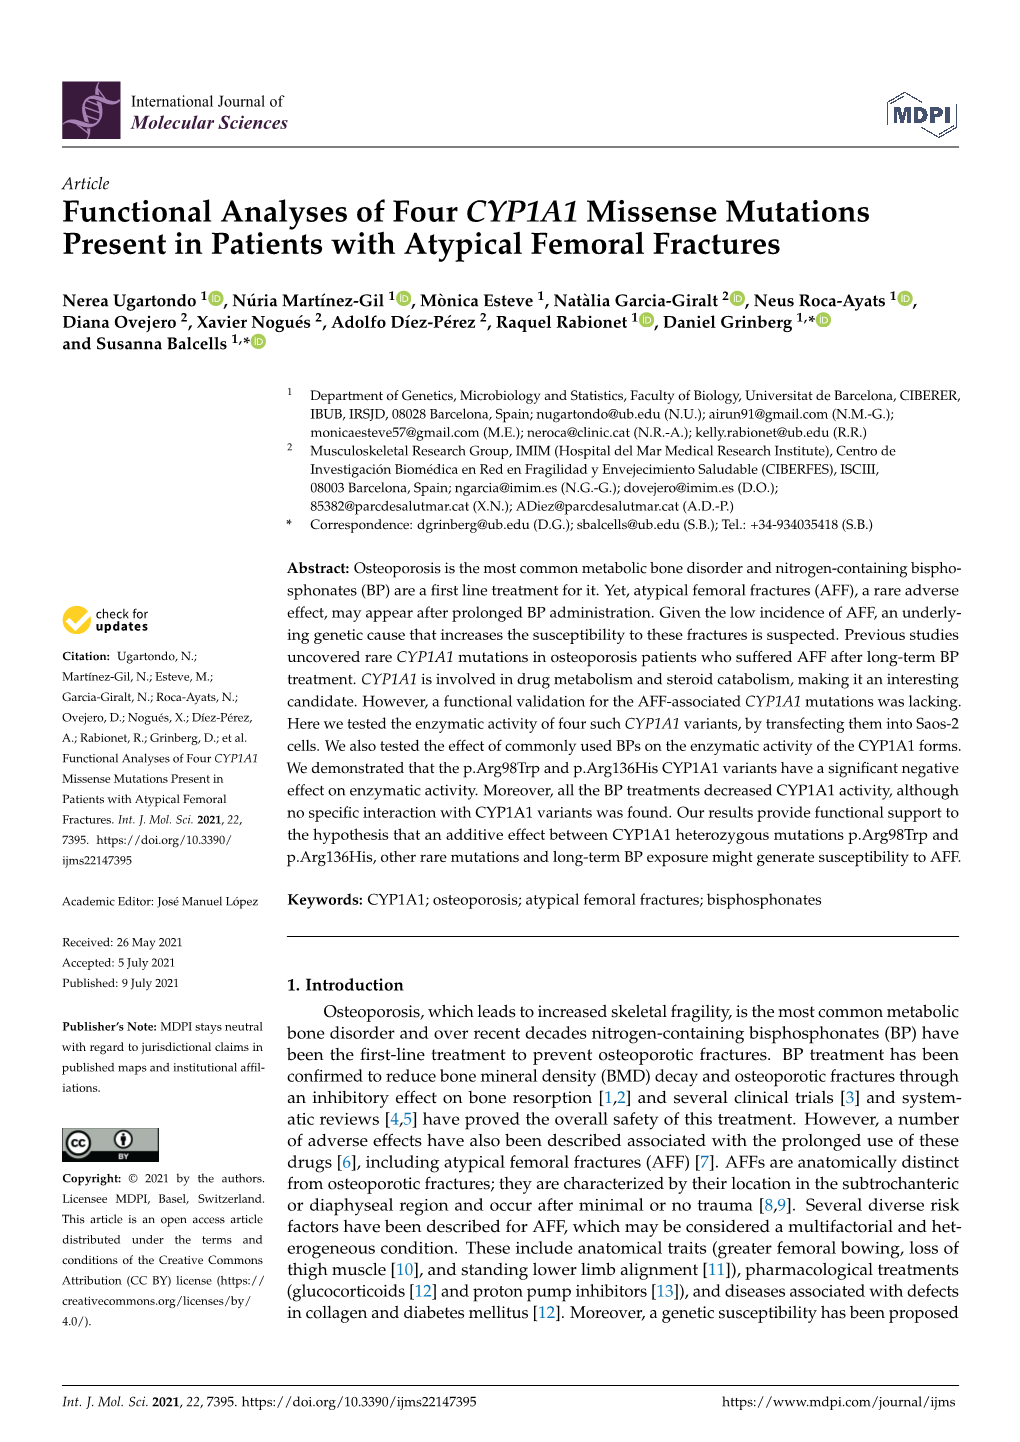 Functional Analyses of Four CYP1A1 Missense Mutations Present in Patients with Atypical Femoral Fractures